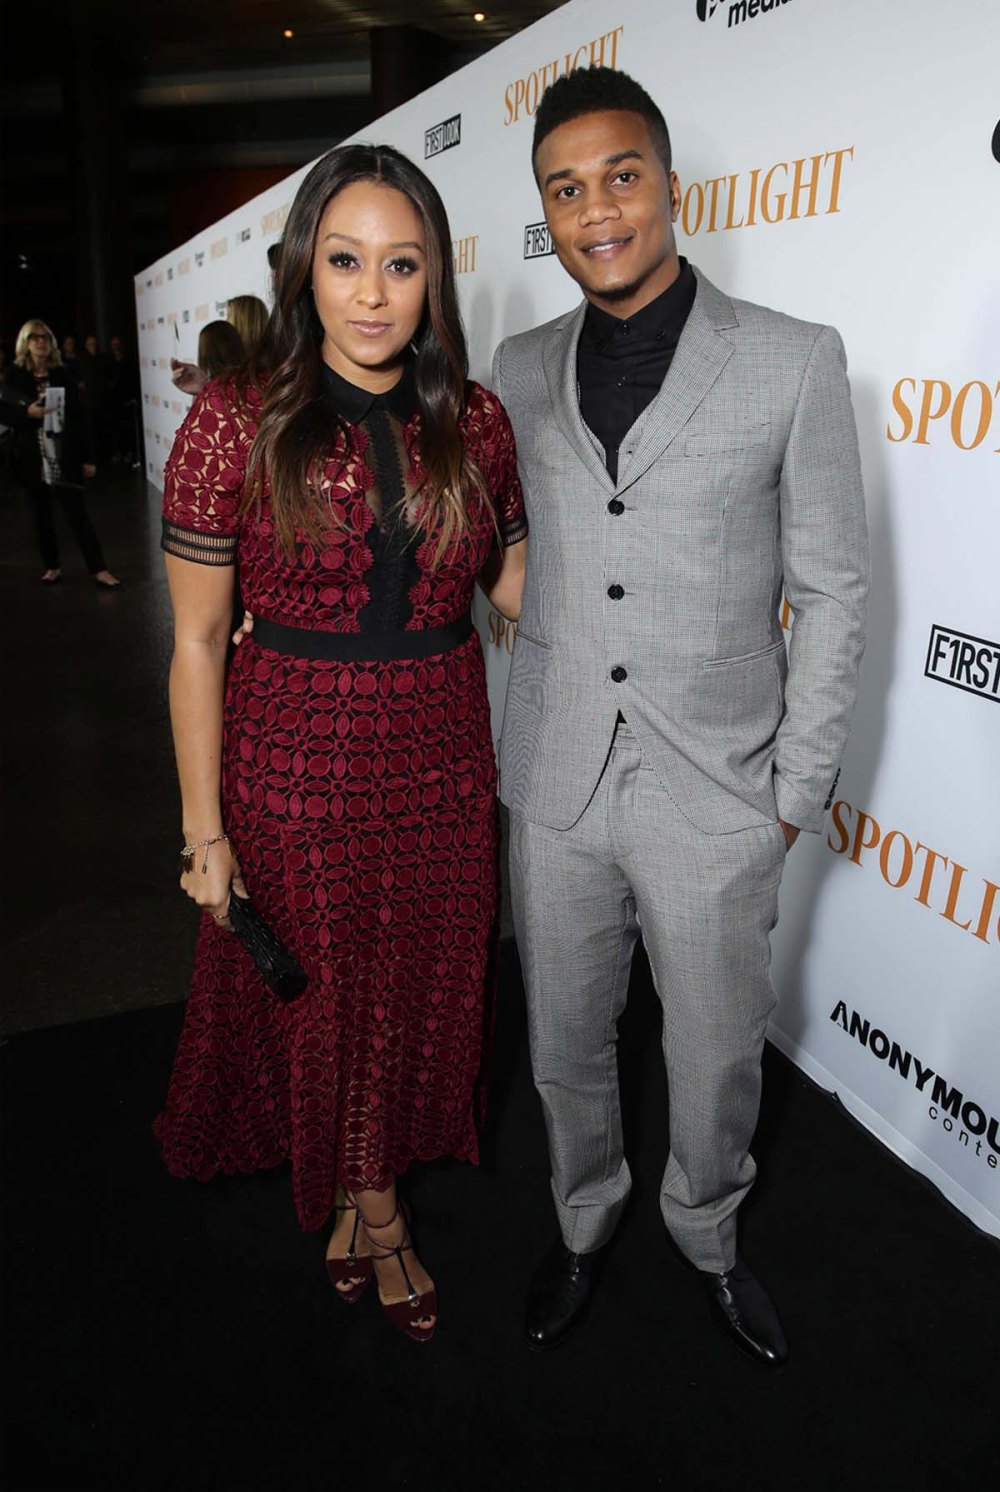 Tia Mowry and Cory Hardrict’s Relationship Timeline